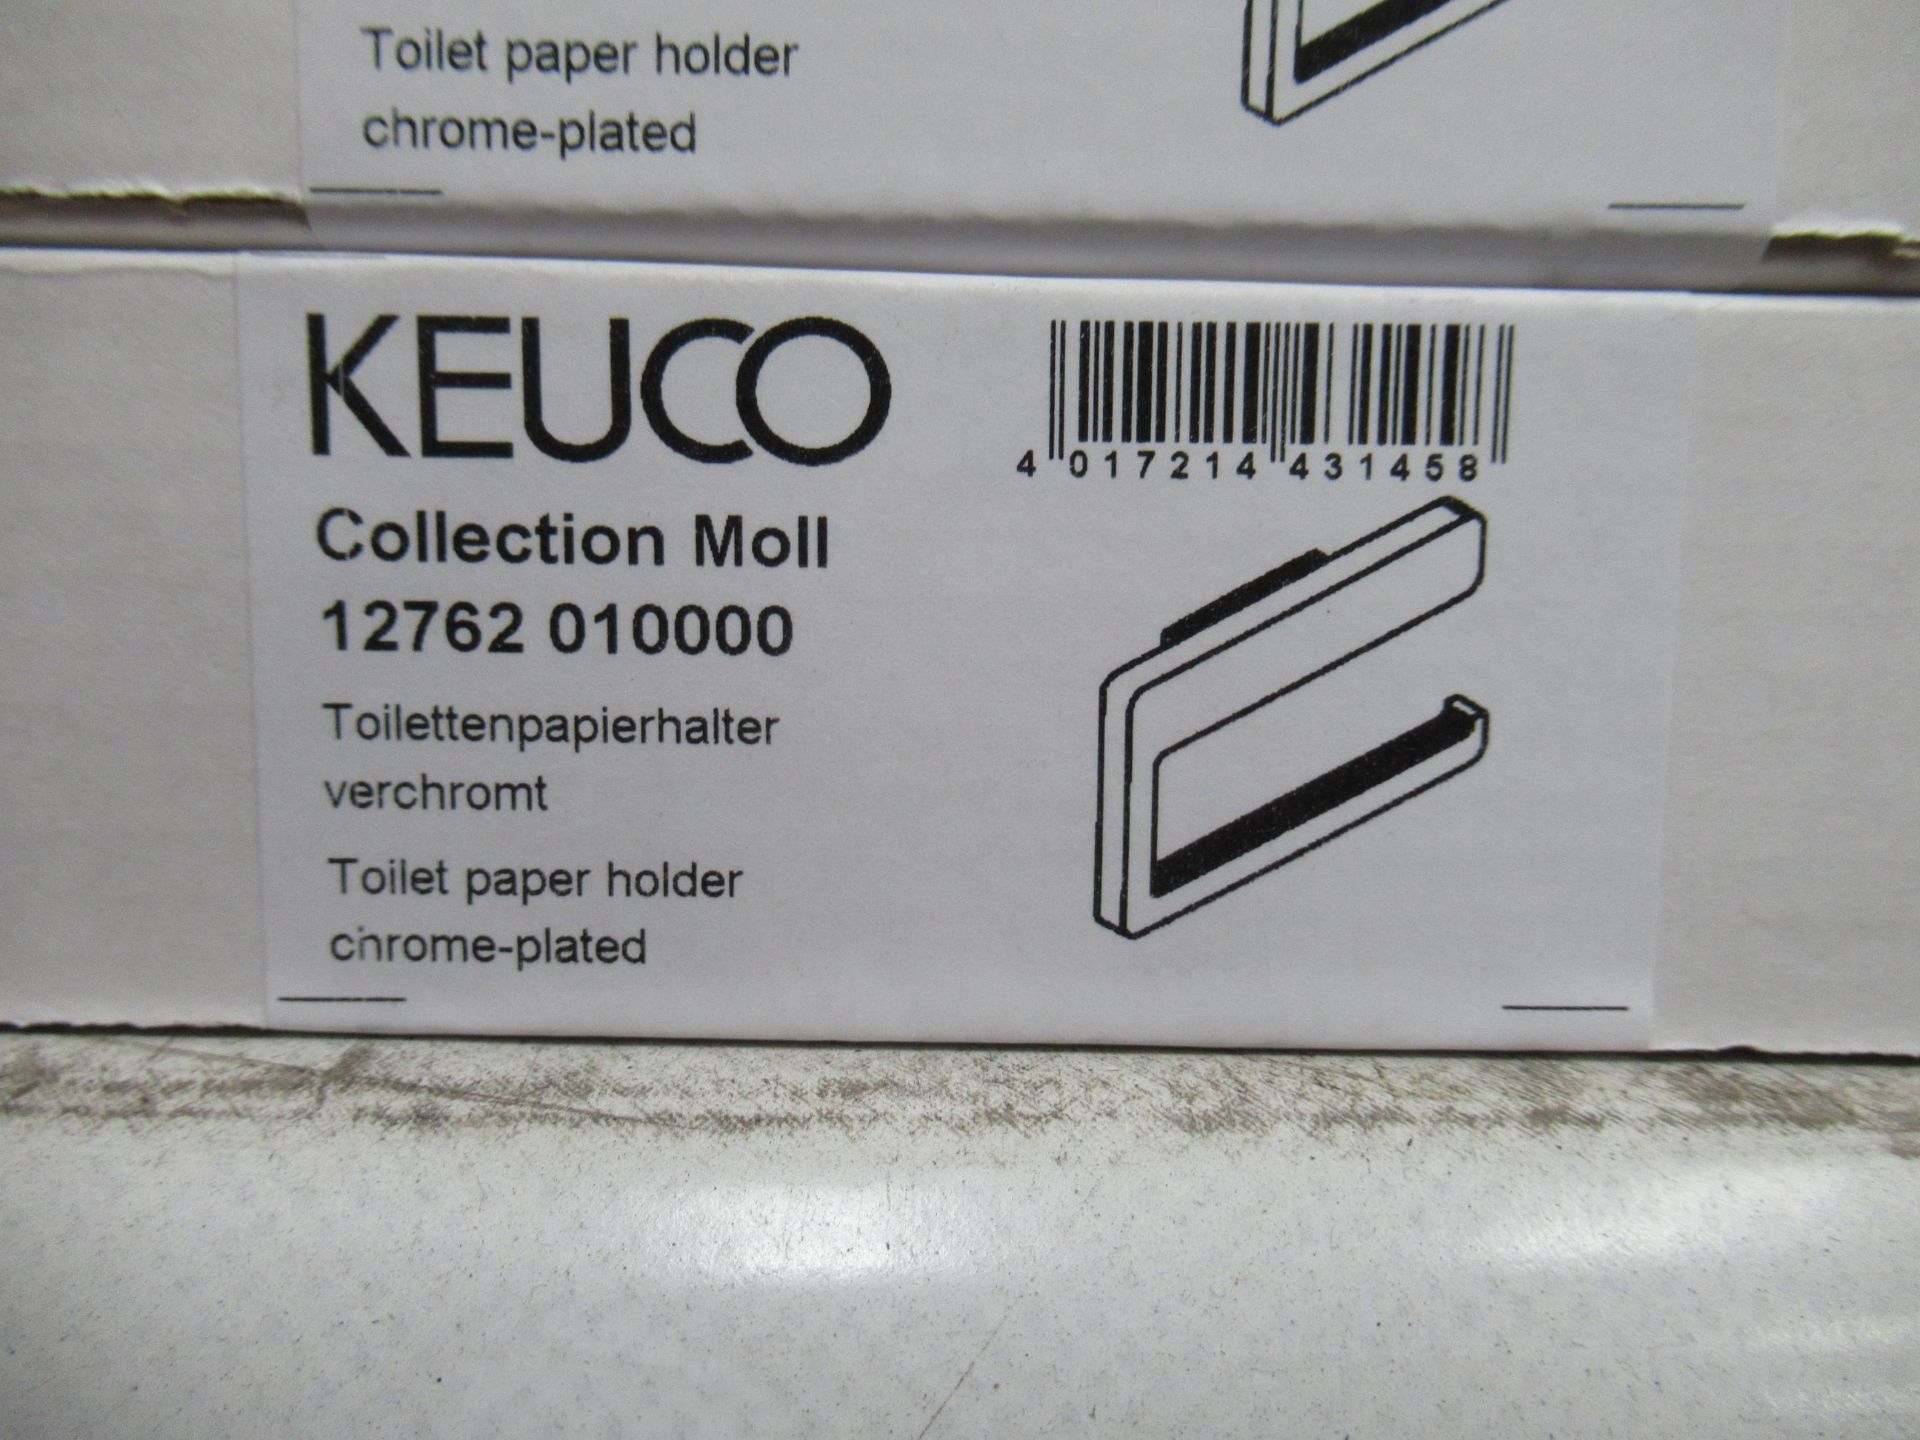 5 x Keuco Collection Moll Toilet Paper Holders Chrome Plated, P/N 12762-010000 - Image 2 of 2